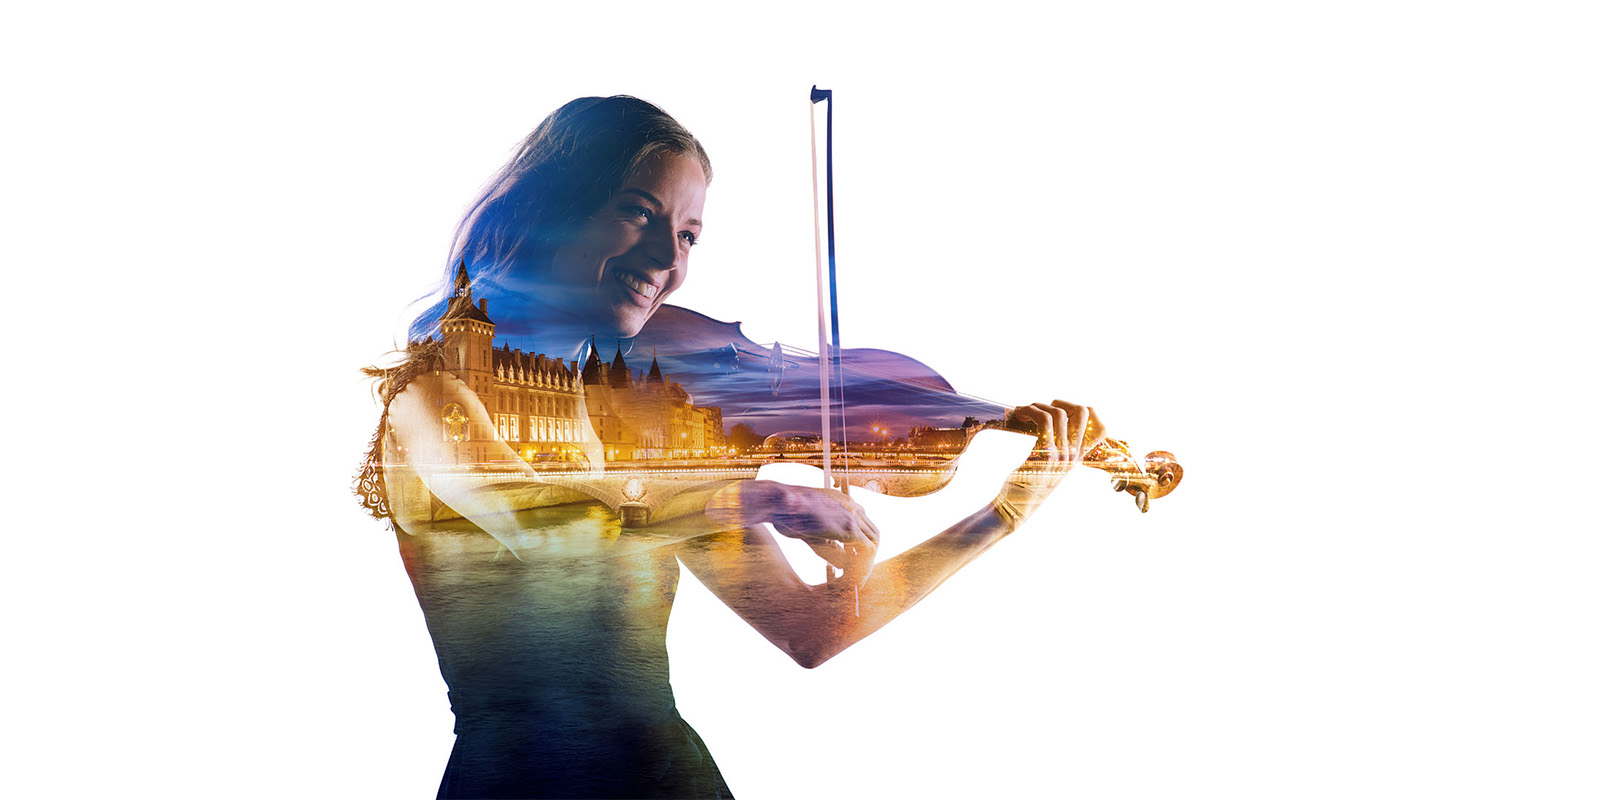 Silhouette of a lady playing violin on a white background. The silhoutte shows a picture of a european building, bridge and river